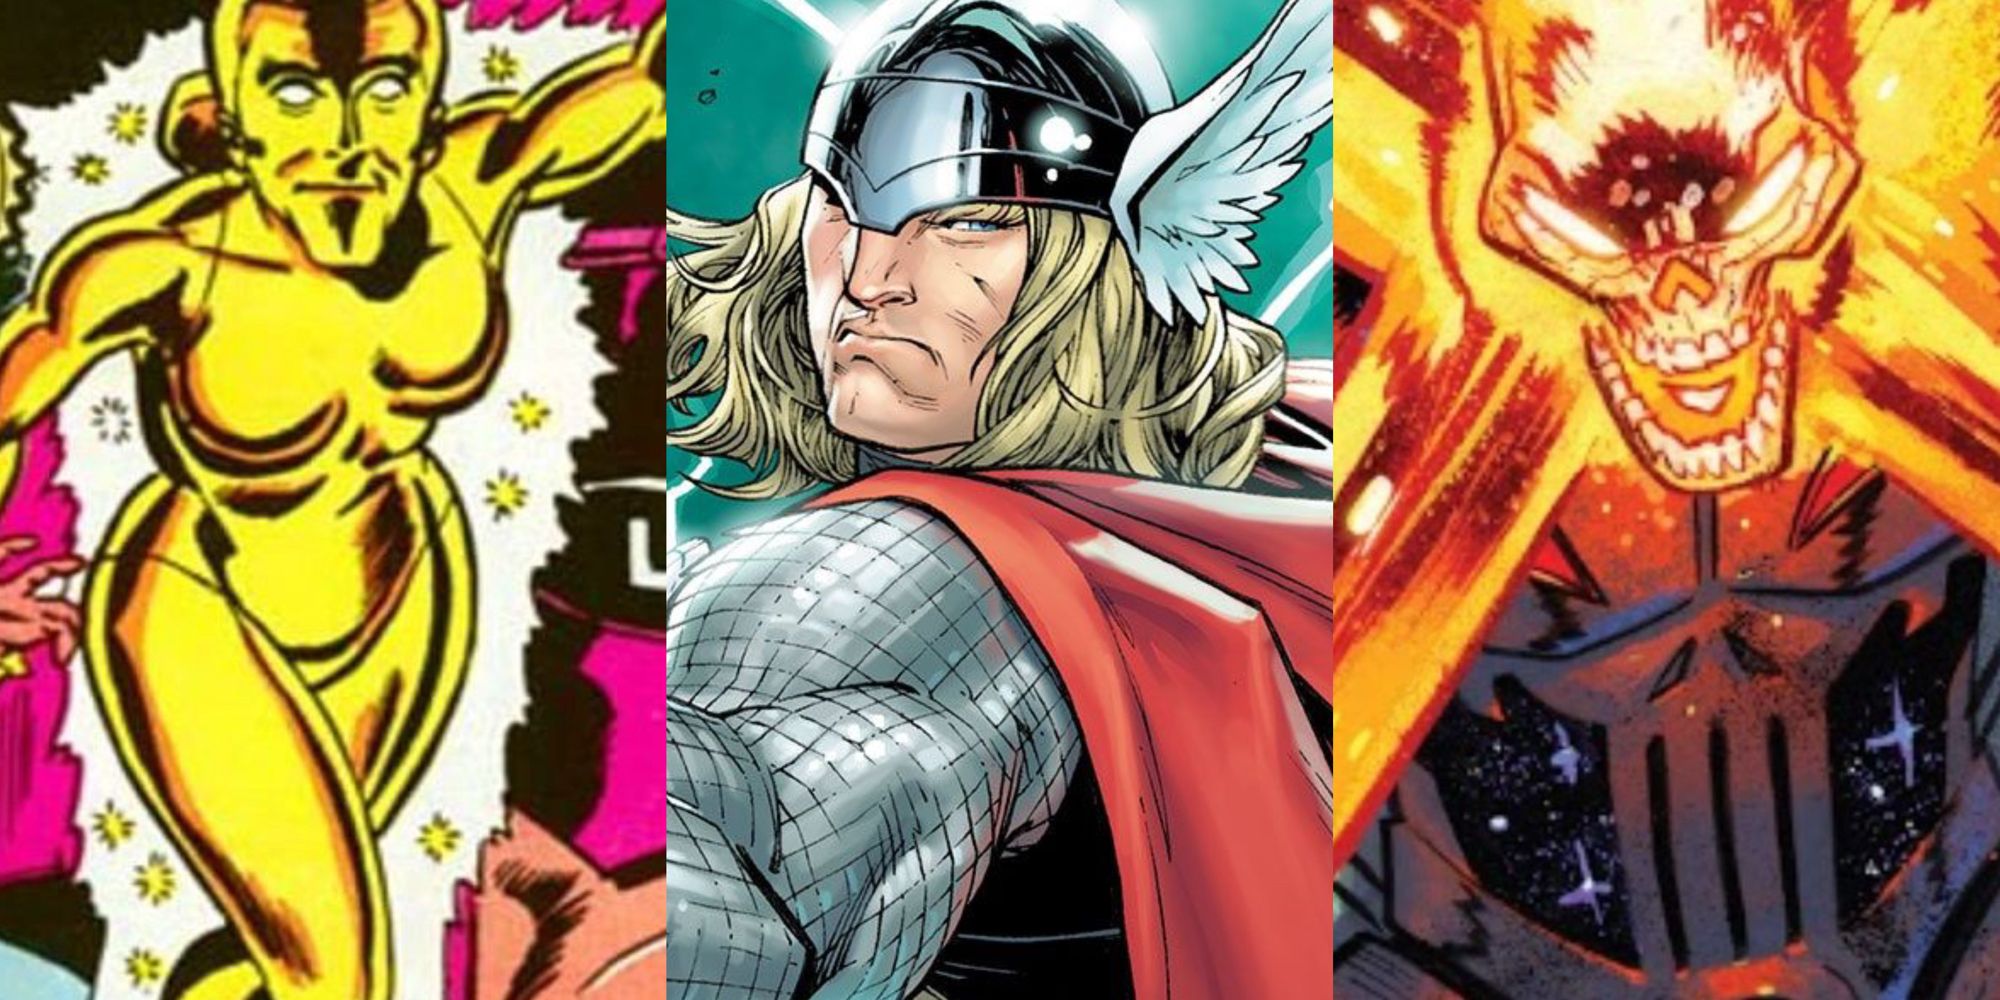 A split image of Marvel characters, including Goldie Oldie, Thor, and Frank Castle as Ghost Rider